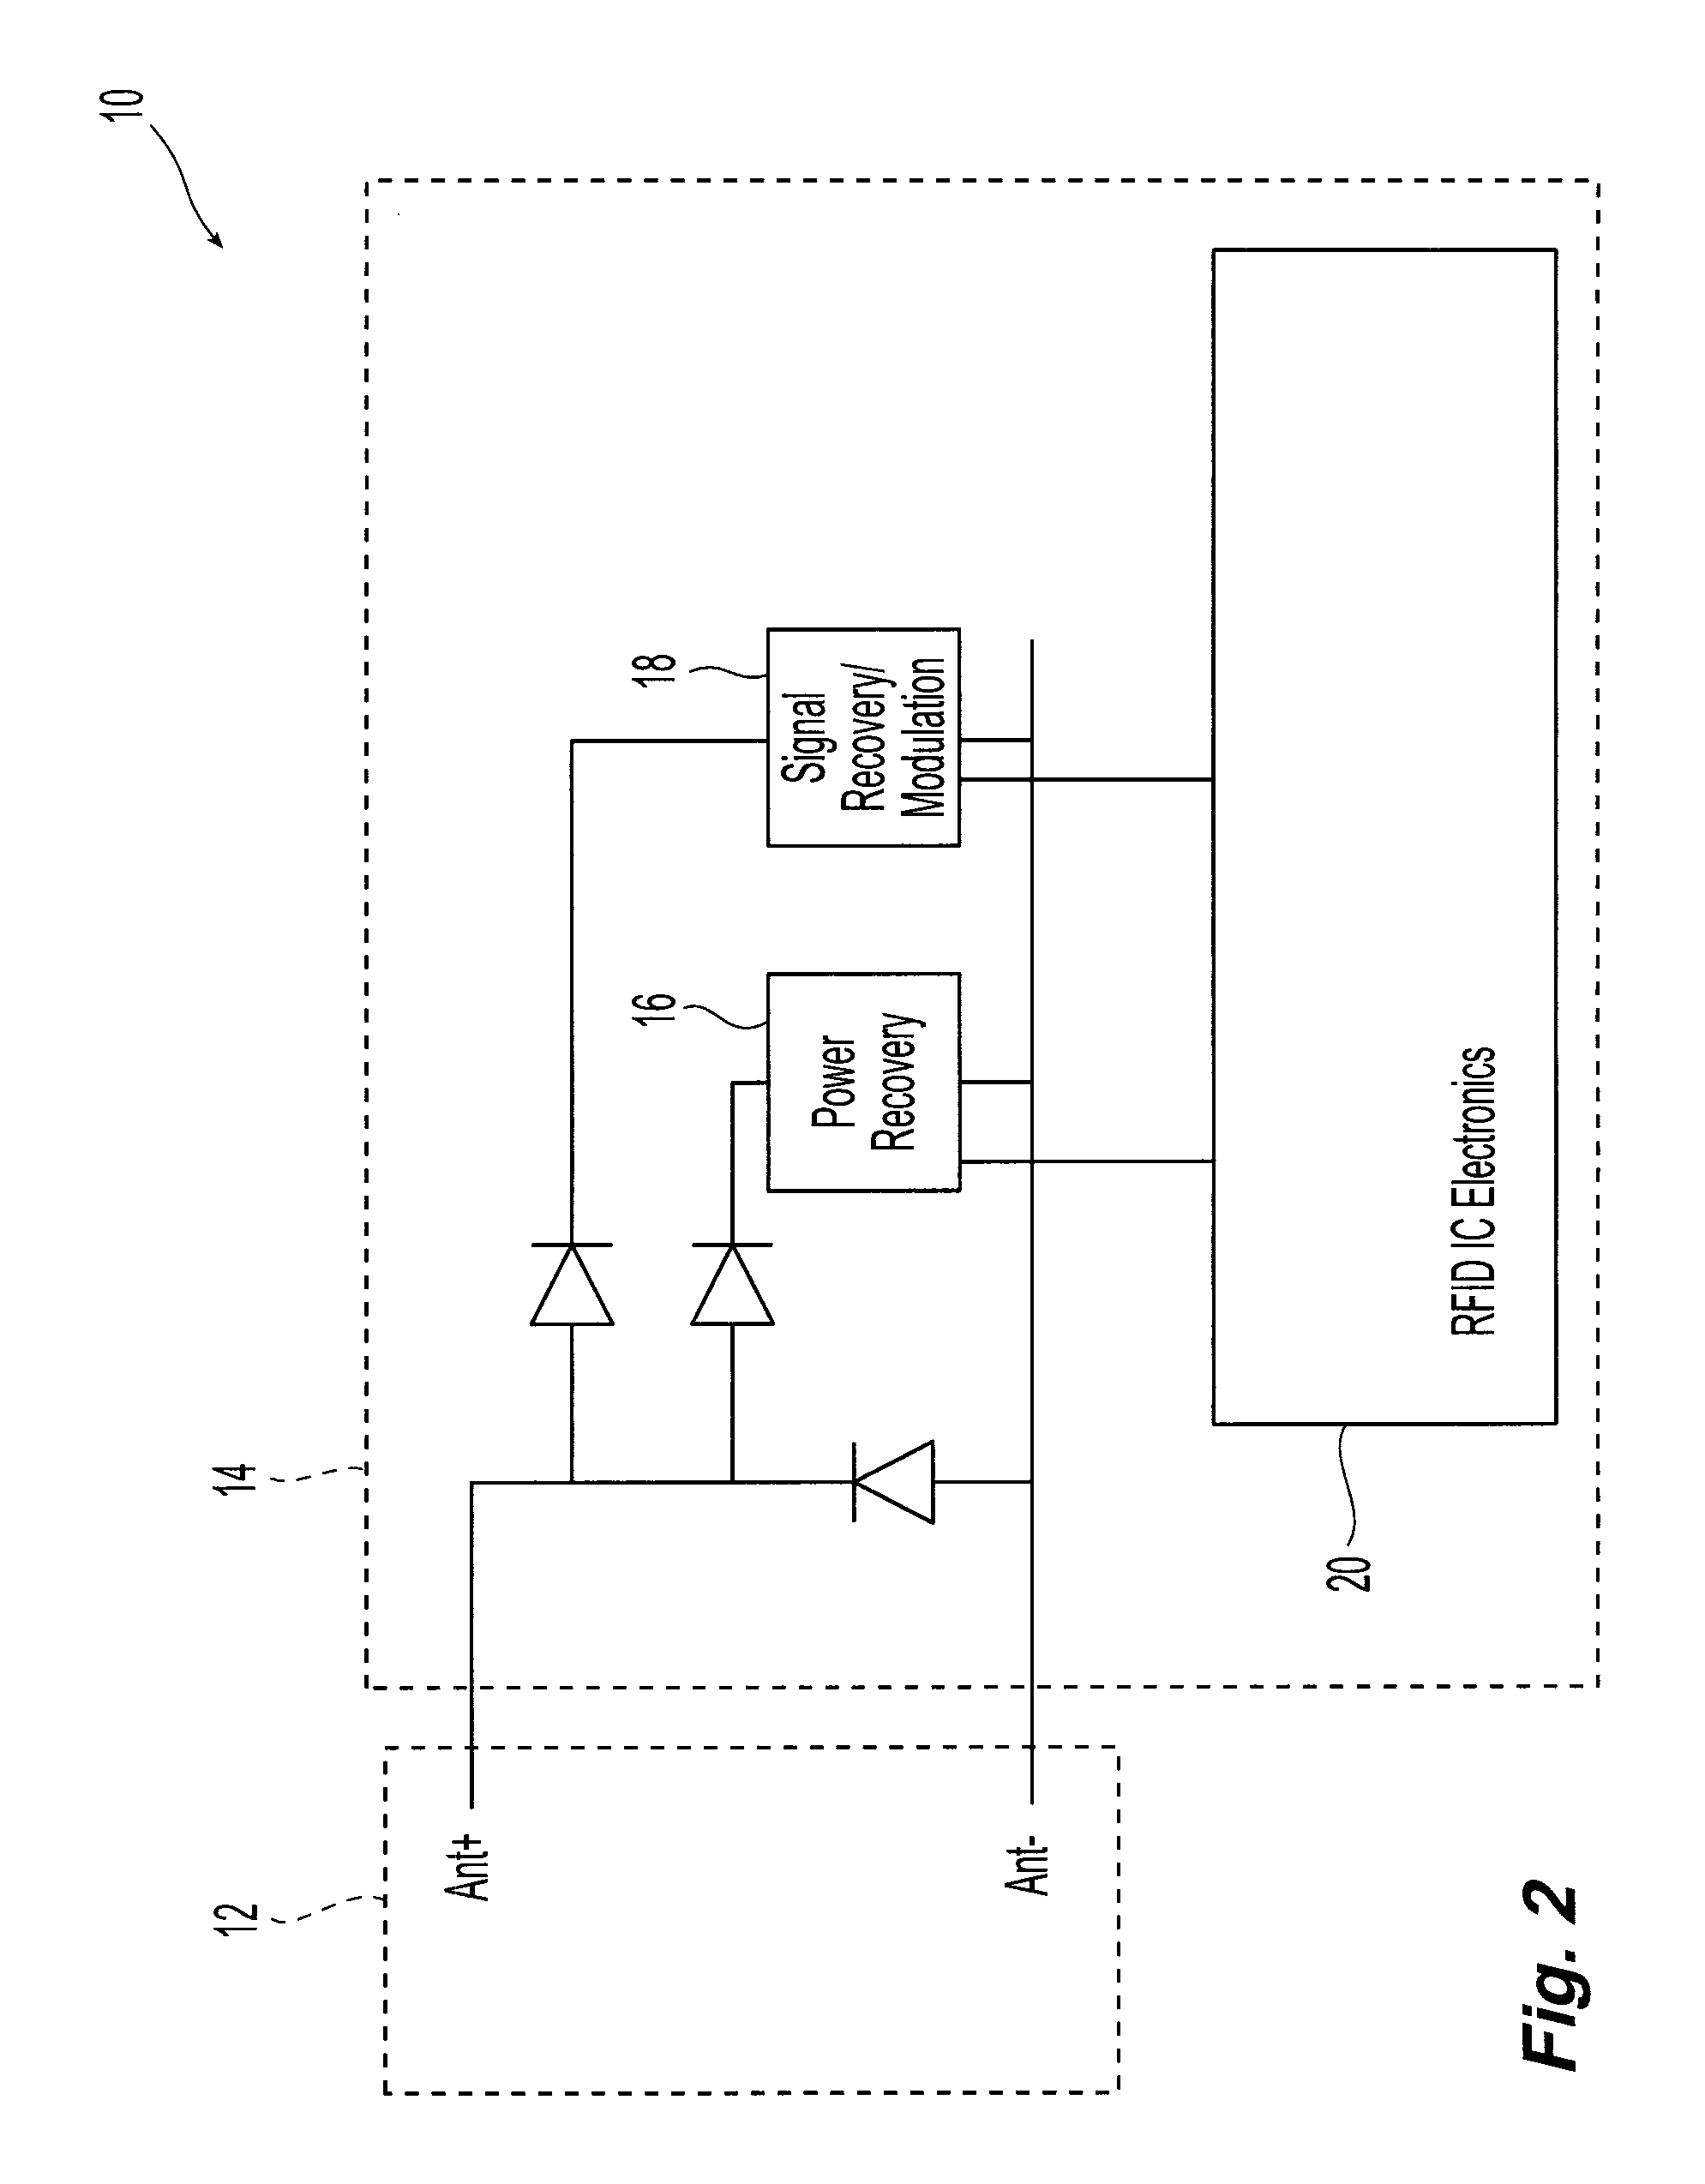 System and Method for Varying Response Amplitude of Radio Transponders